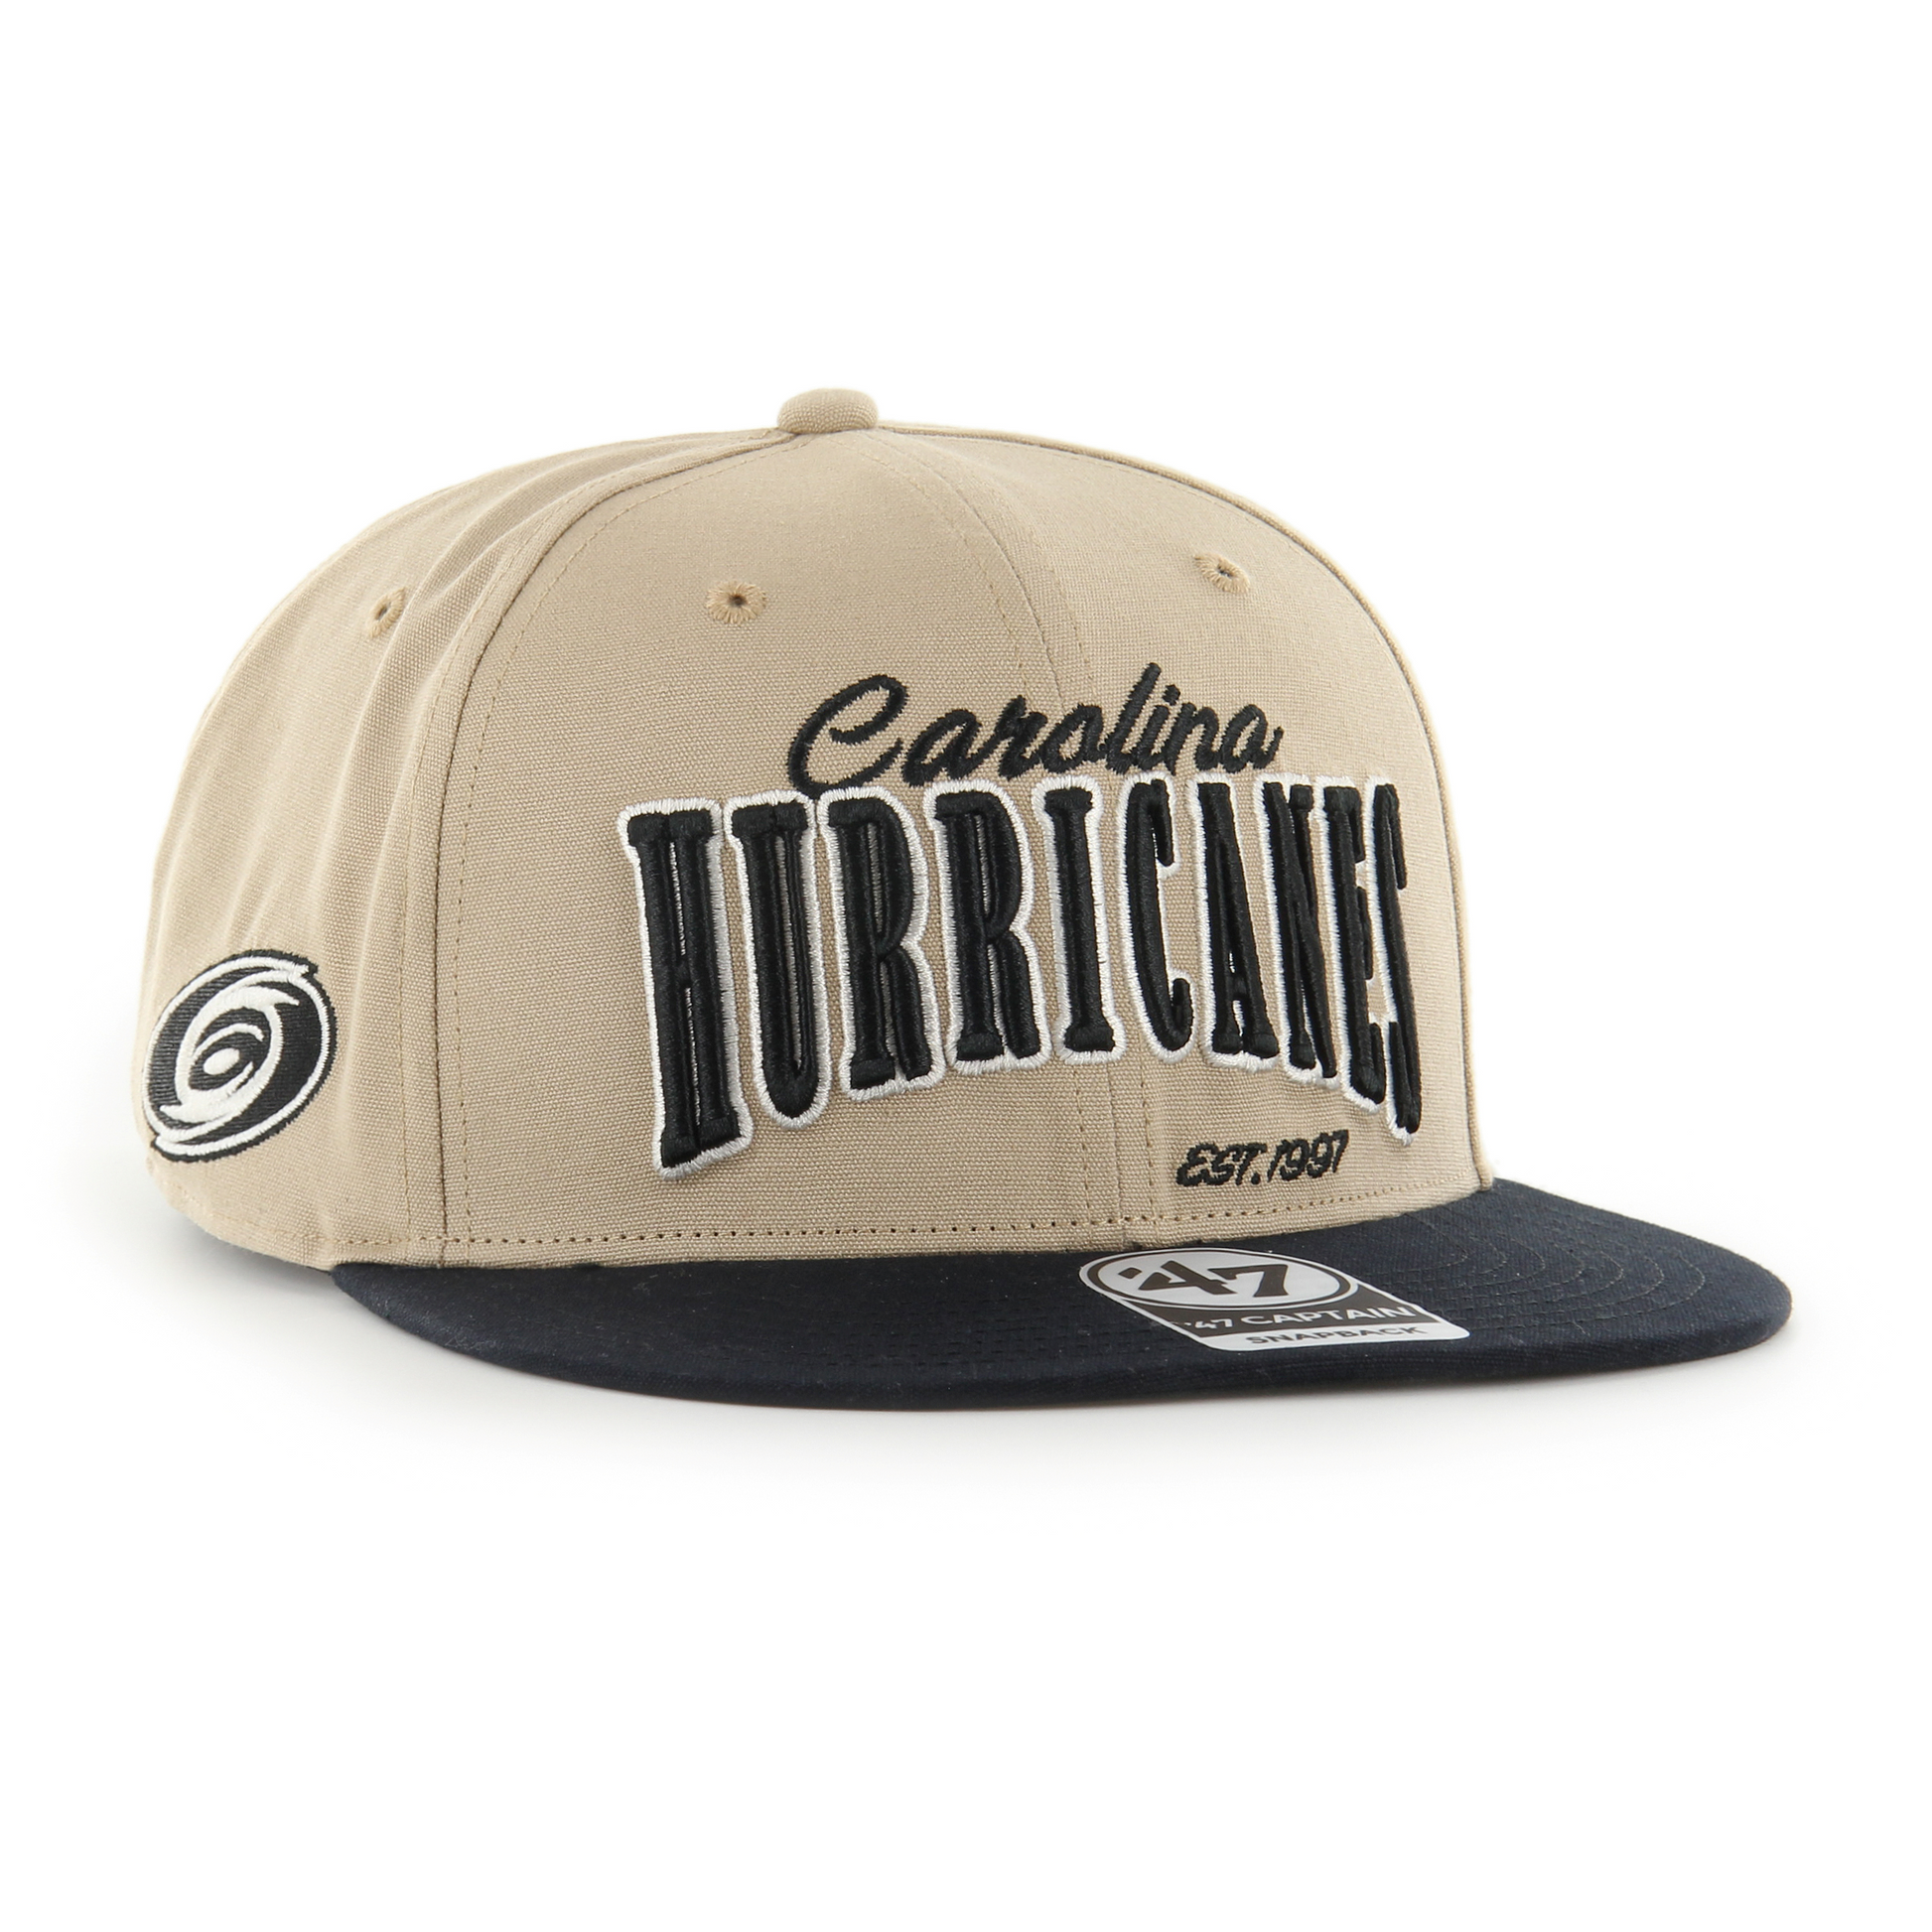 Front: Tan snapback with canes logo on side and black flatbrim